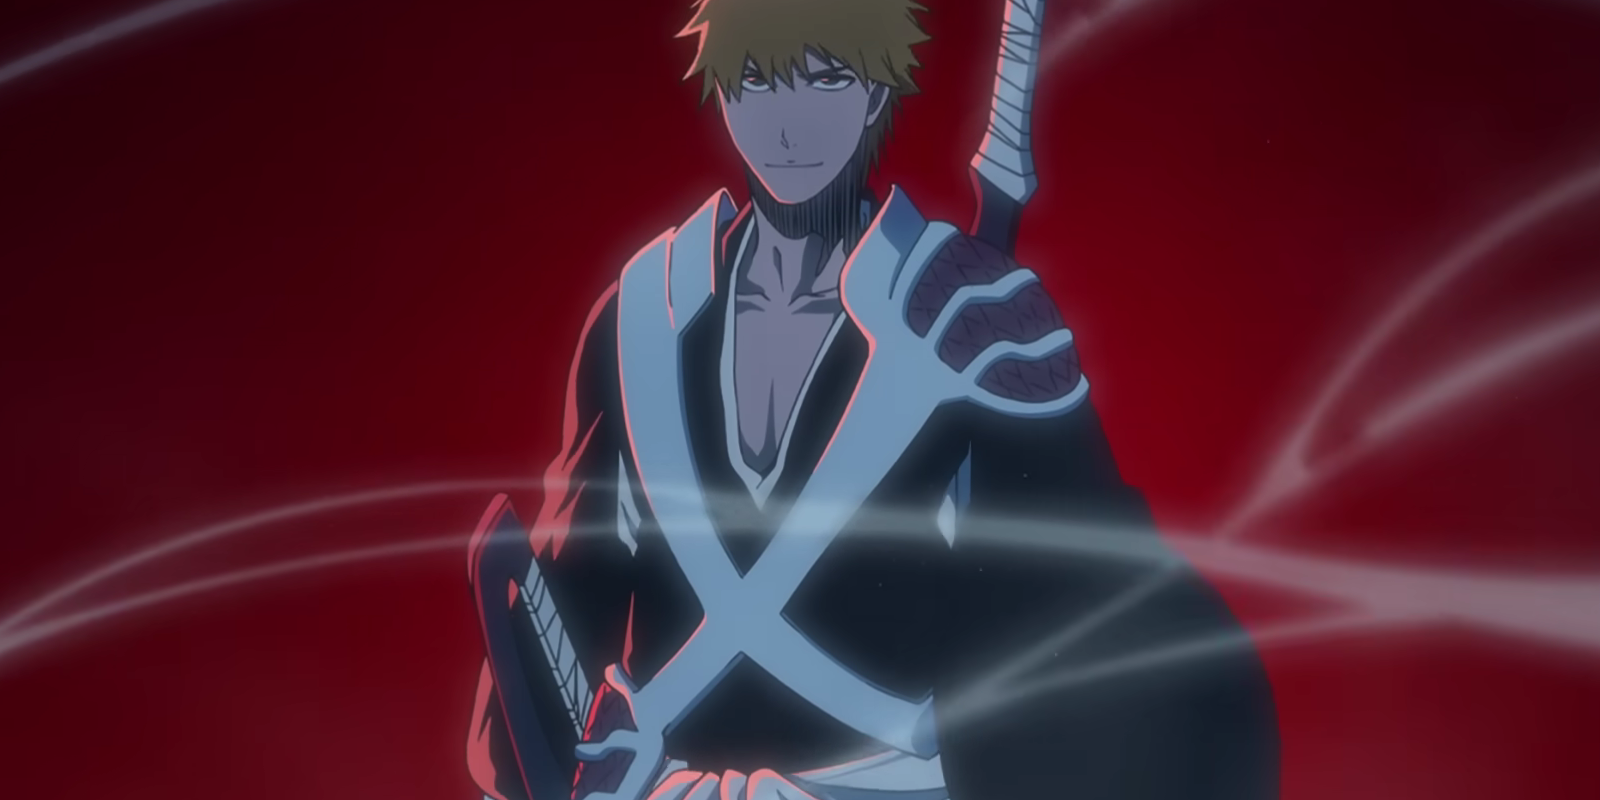 Bleach: Thousand-Year Blood War Trailer Pits Quincy Against Soul Reaper